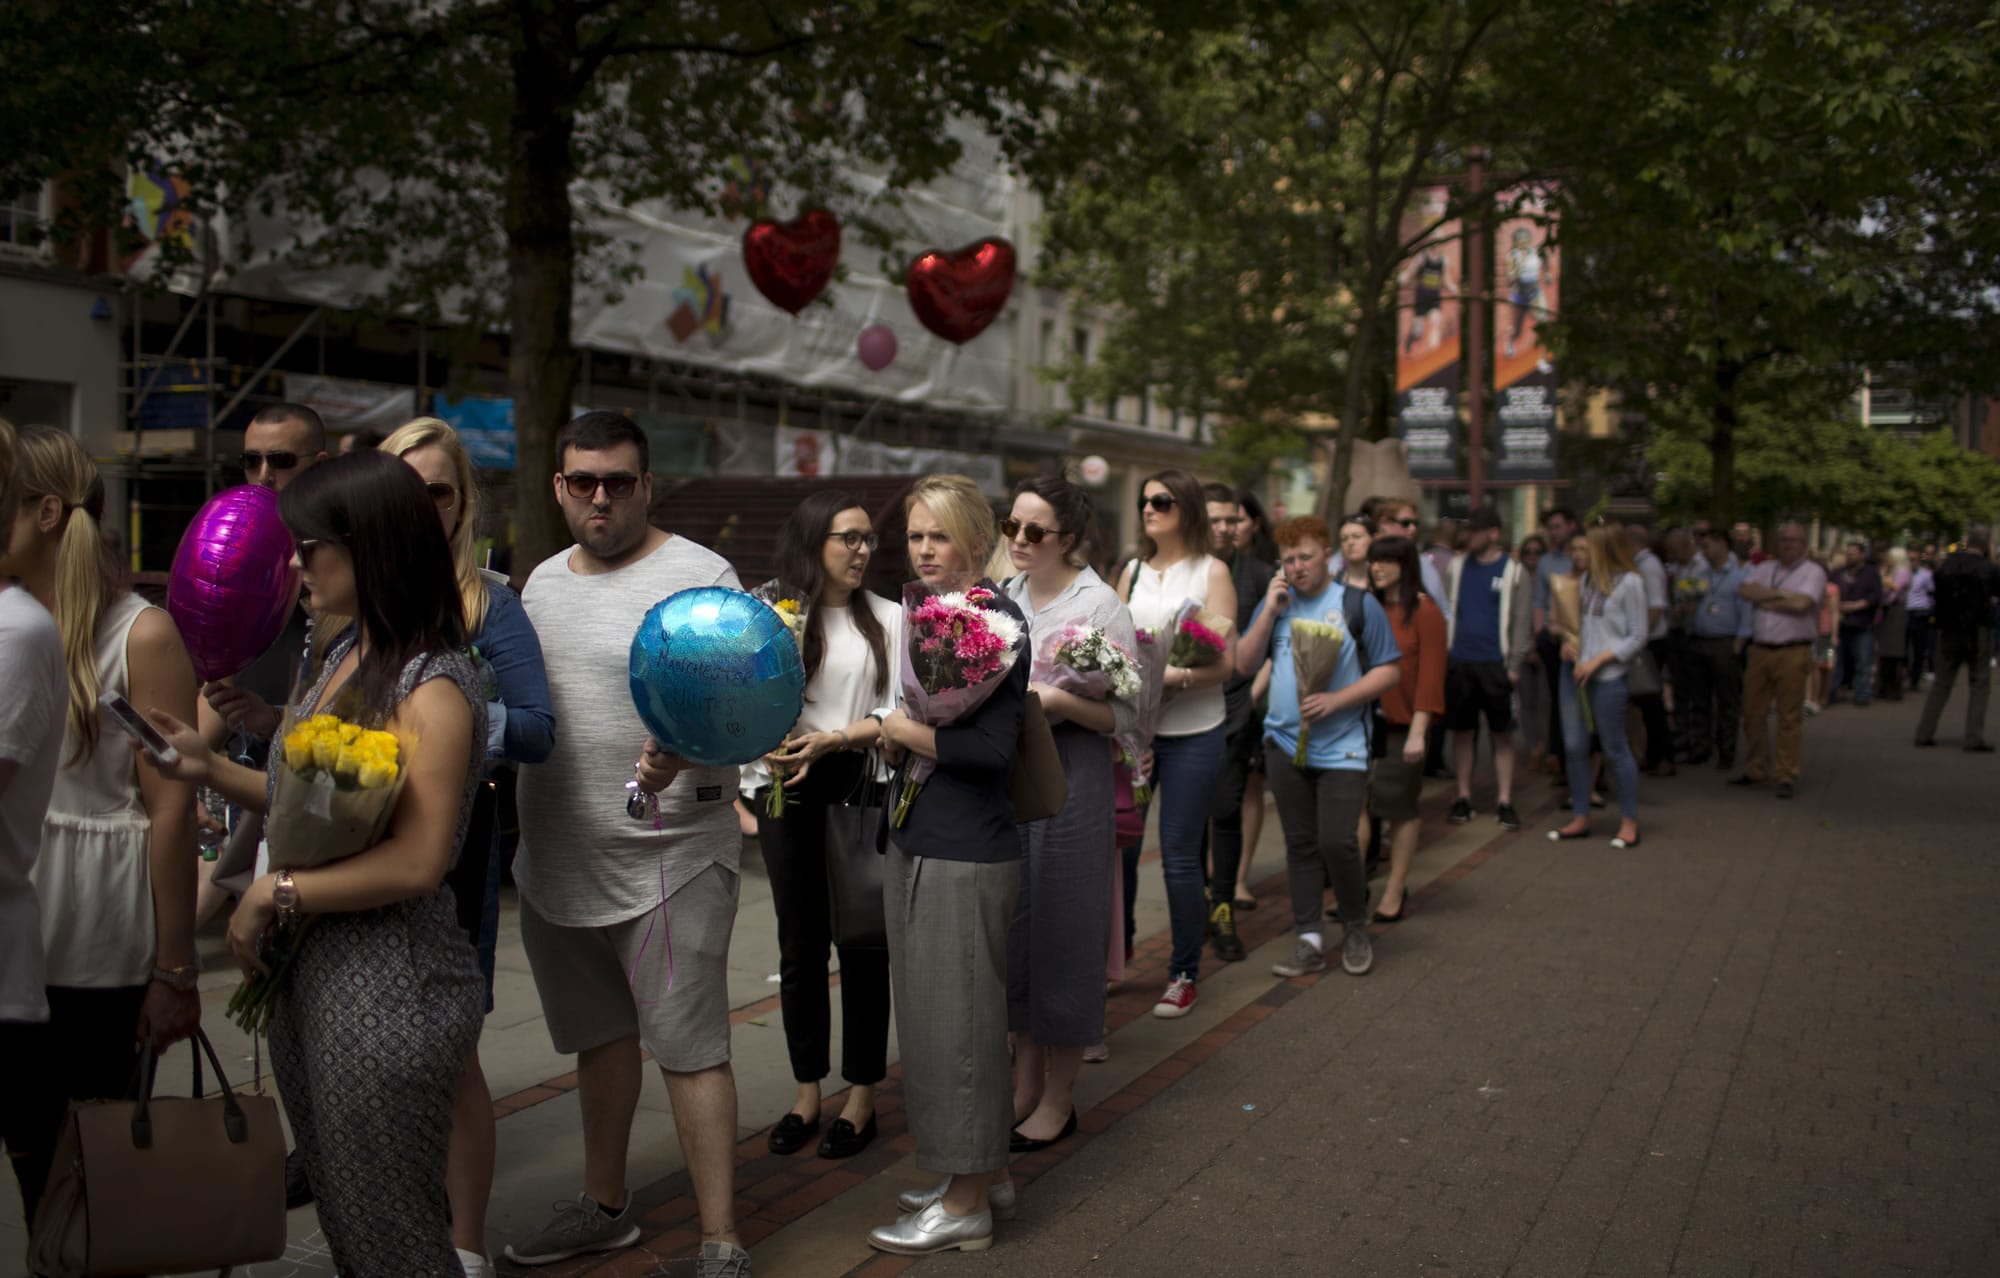 People queue to place flowers at St Ann's square in central Manchester, England Thursday May 25 2017. More than 20 people were killed in an explosion following a Ariana Grande concert at the venue late Monday evening. Britons will find armed troops at vital locations Wednesday after the official threat level was raised to its highest point.